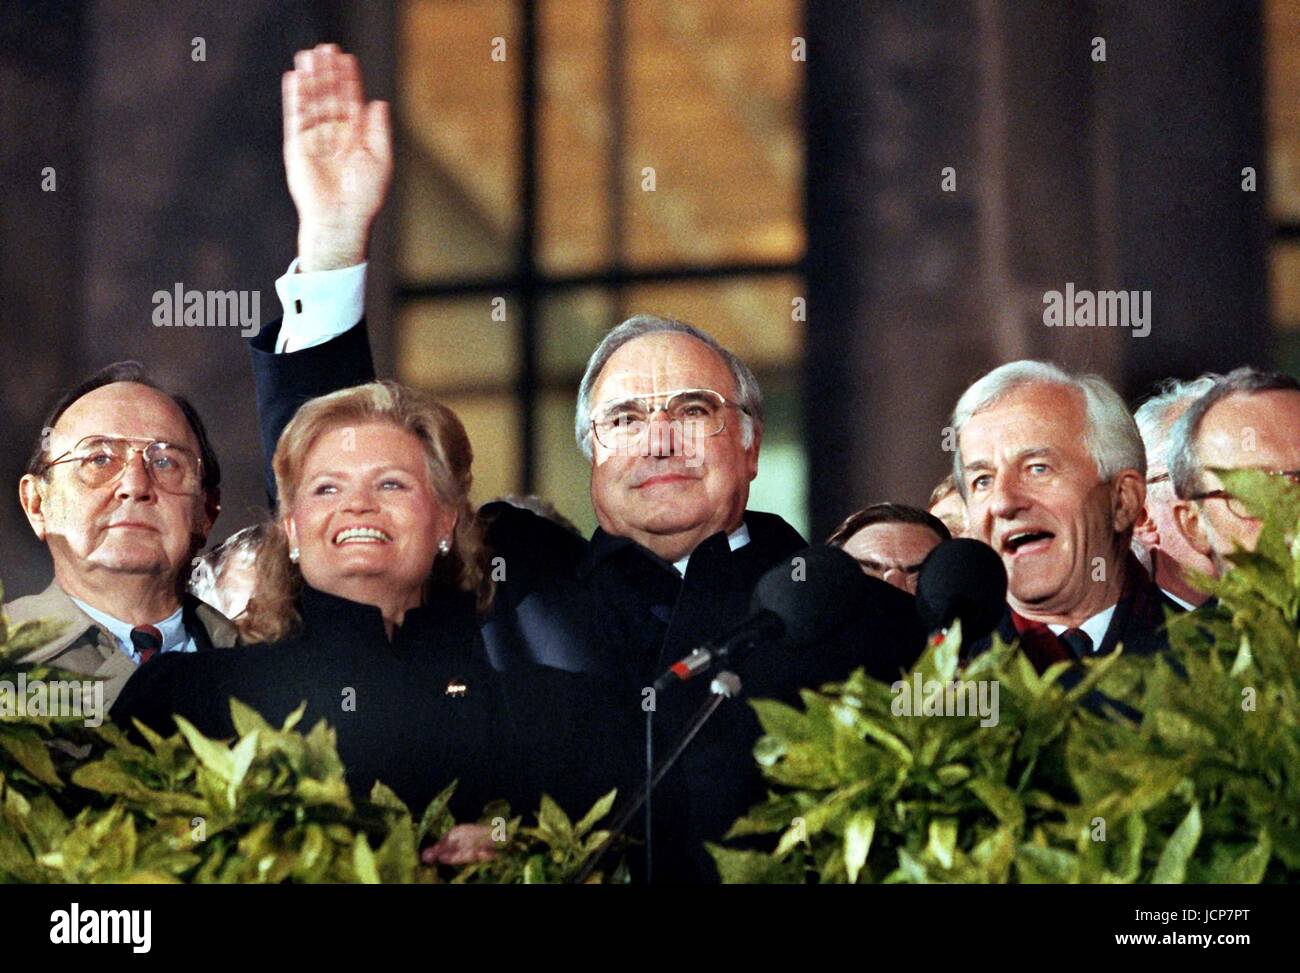 dpatop - FILE - (L-R) Then German Foreign Minister Hans-Dietrich Genscher, Hannelore Kohl, then German Chancellor Helmut Kohl, then German President Richard von Weizsaecker and Lothar de Maiziere (half concealed), the last Prime Minister of the German Democratic Republic (GDR), at the celebrations in Berlin, Germany, 03 October 1990. Helmut Kohl died at the age of 87 on 16 June 2017. Photo: Wolfgang Kumm/dpa Stock Photo